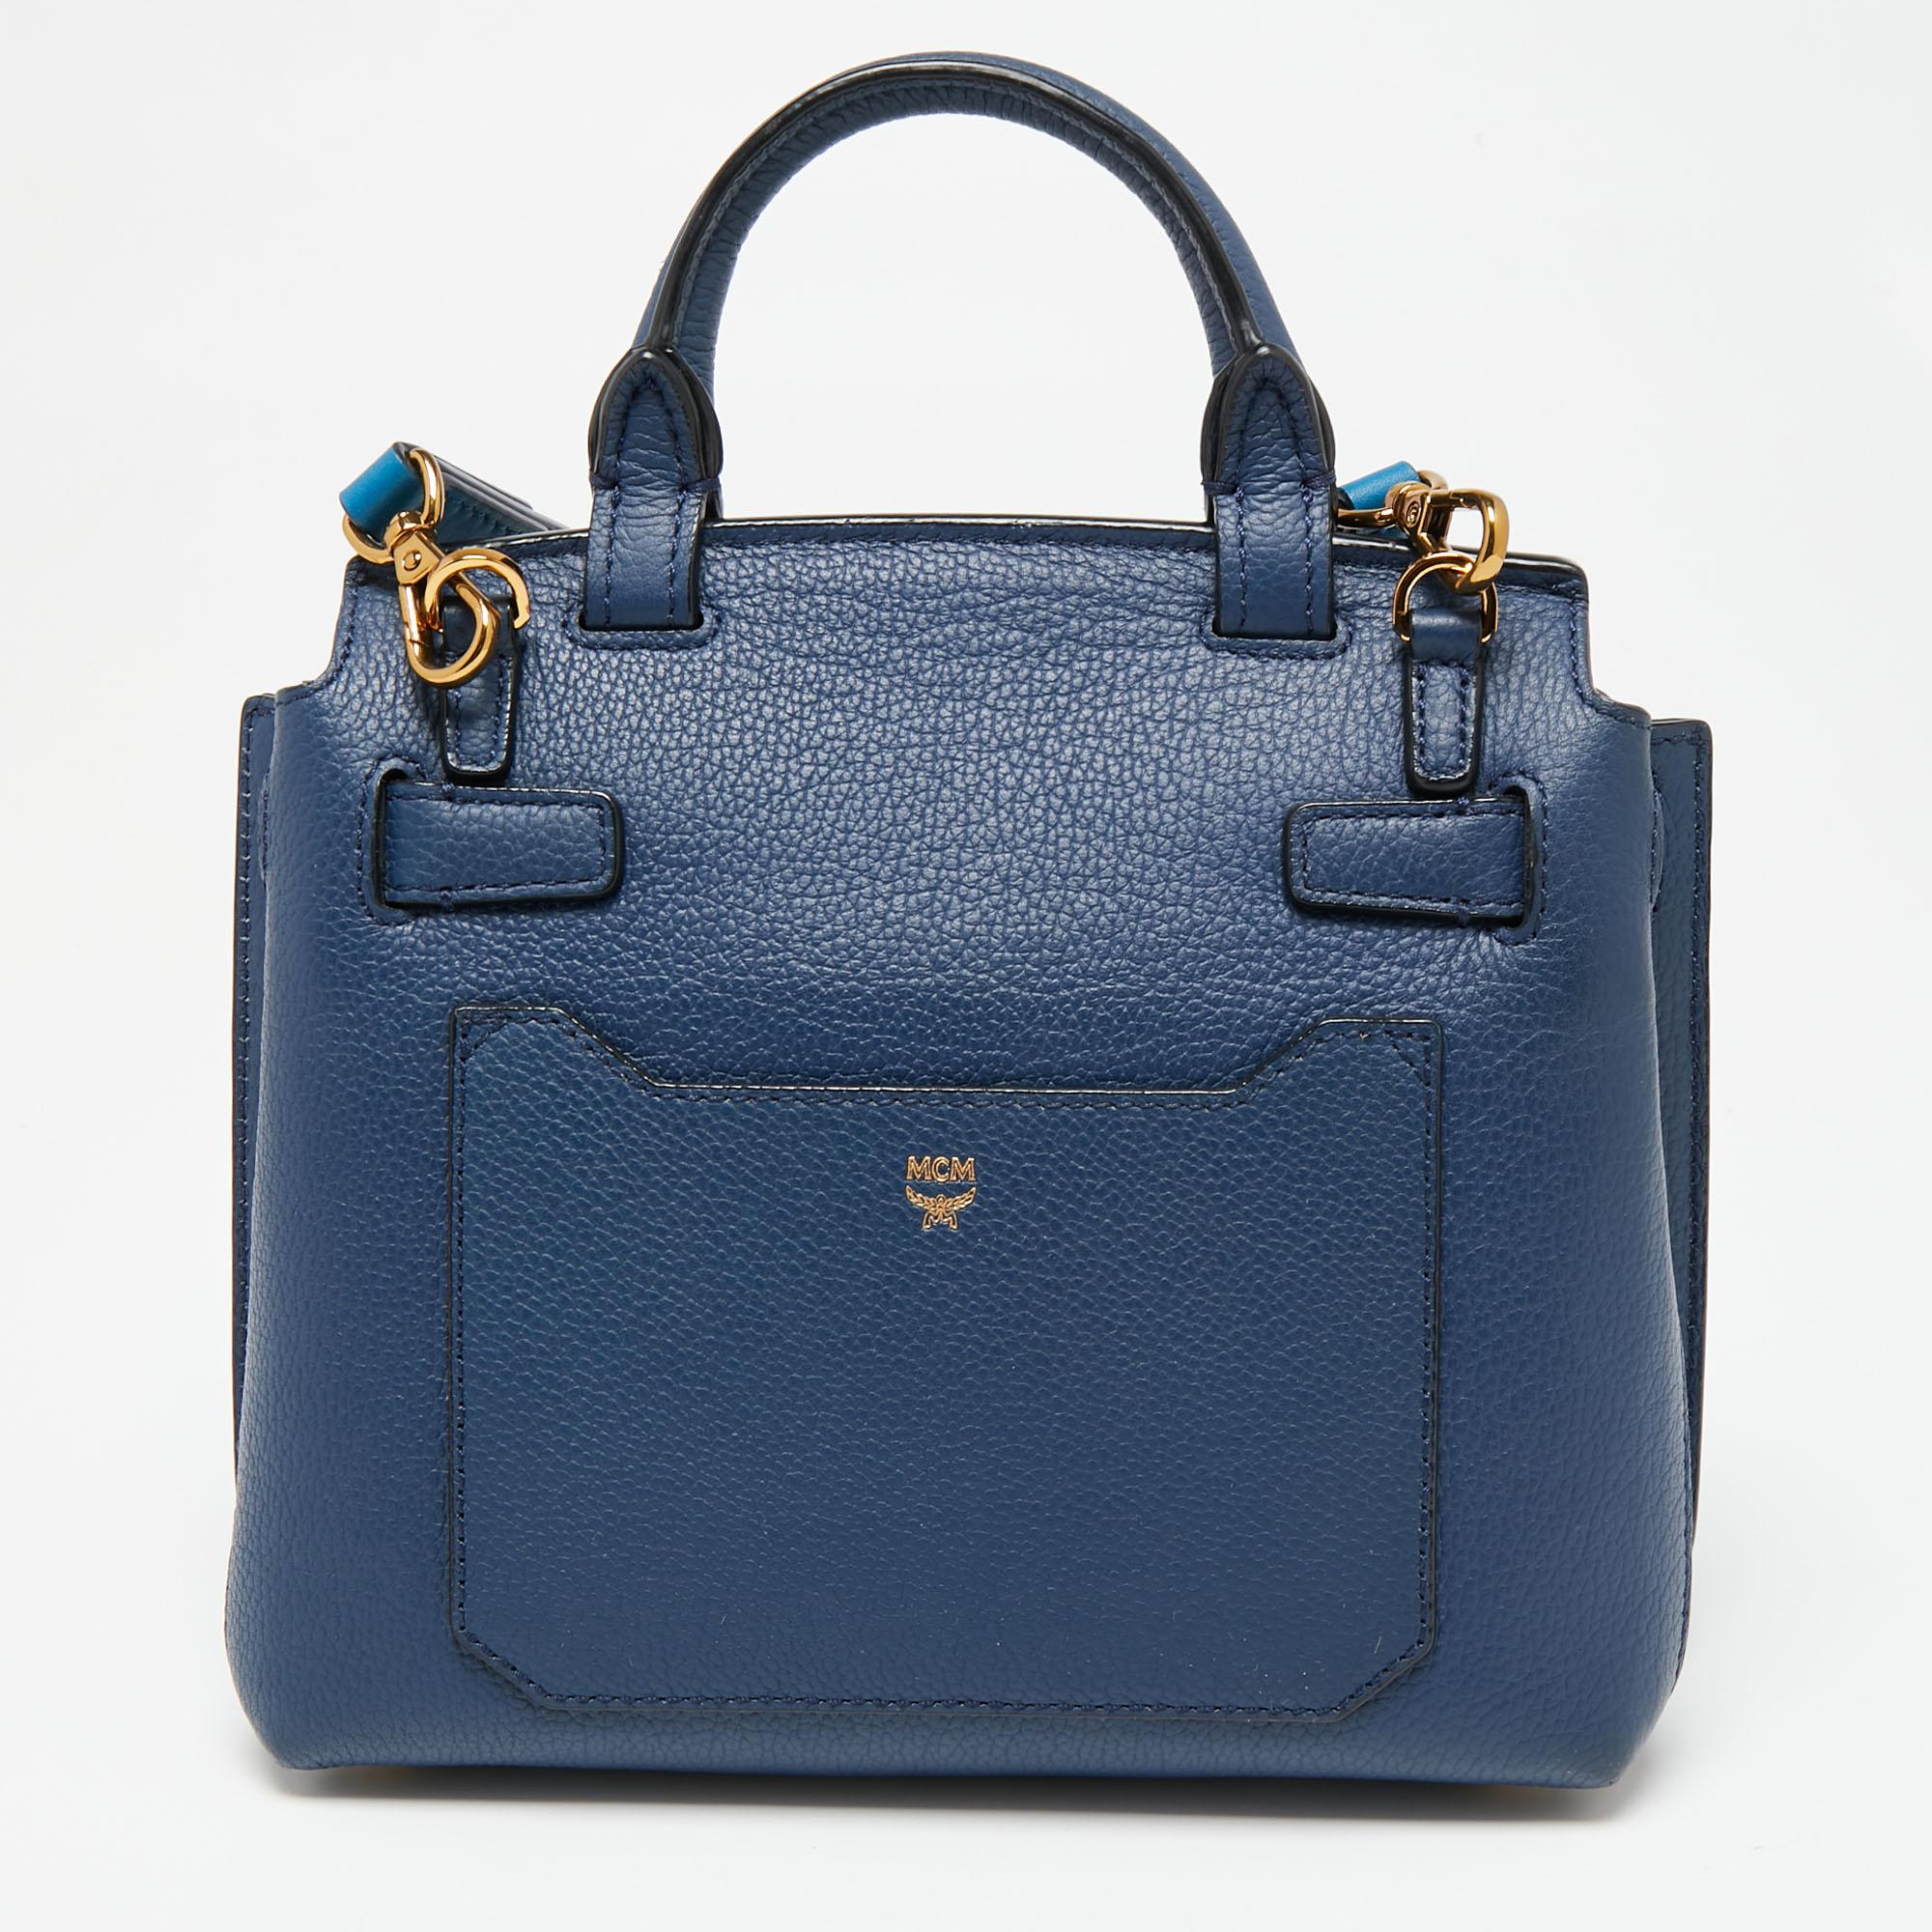 For your busy days, this MCM bag is totally perfect! It is crafted from navy blue leather and flaunts gold-tone details. The bag is finished with a top handle, a detachable strap, and a roomy Alcantara interior that can easily carry your